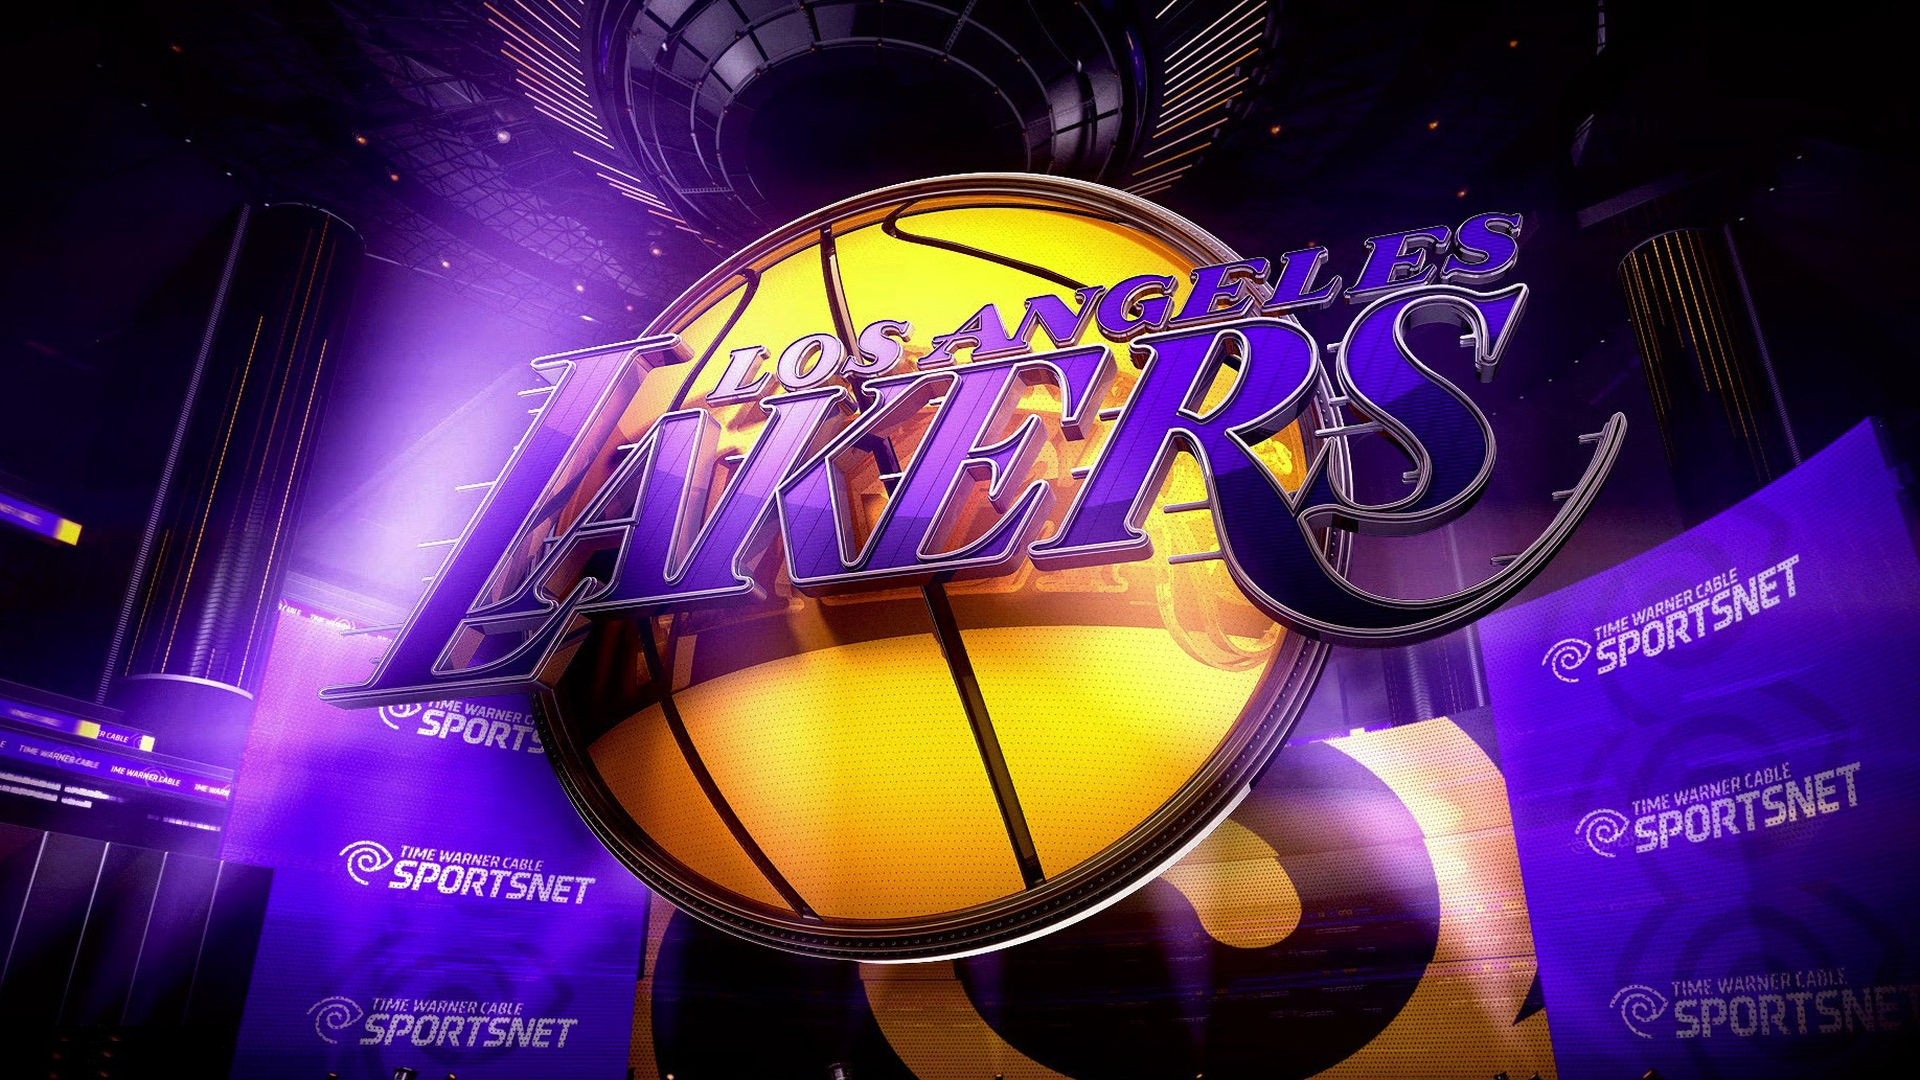 Los Angeles Lakers For PC Wallpaper with image dimensions 1920x1080 pixel. You can make this wallpaper for your Desktop Computer Backgrounds, Windows or Mac Screensavers, iPhone Lock screen, Tablet or Android and another Mobile Phone device